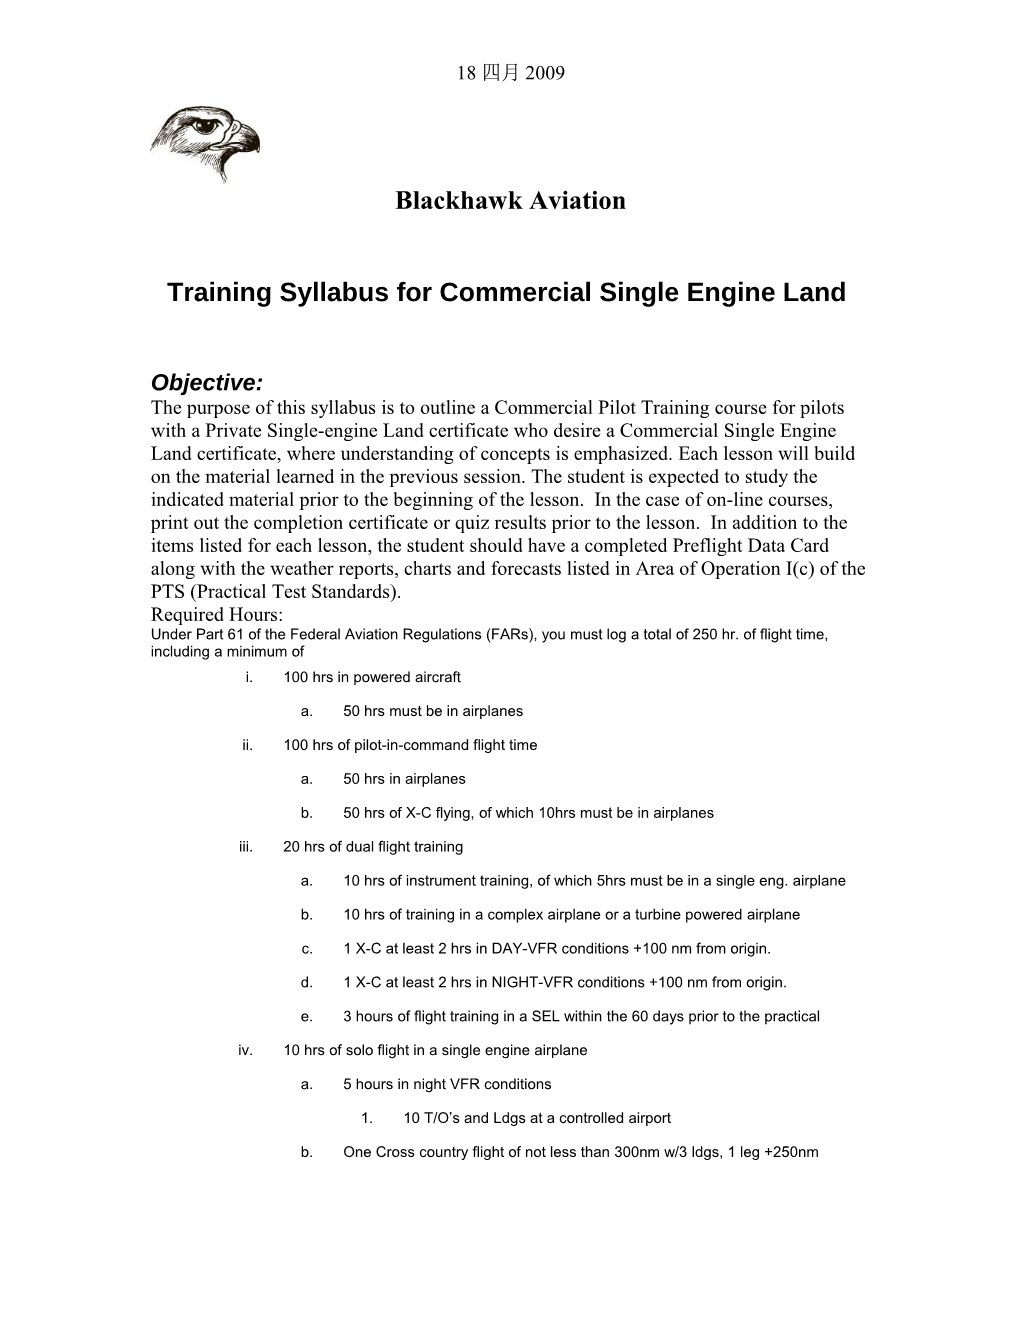 Training Syllabus for Private Single Engine Land Add-On